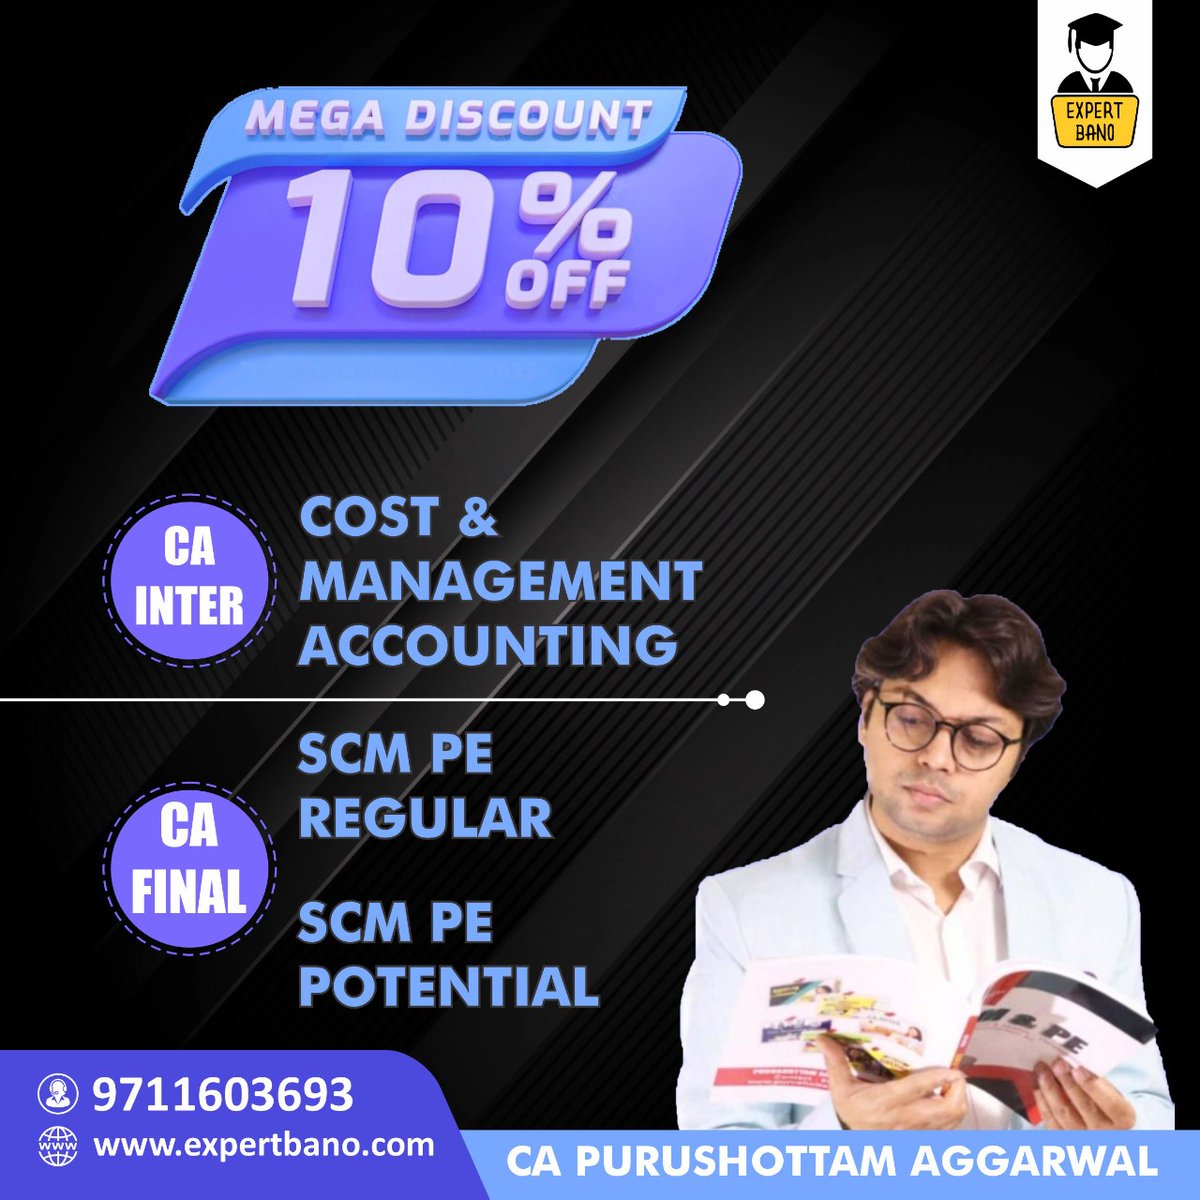 Flat 10% discount on CA Inter and Final Costing by CA Purushottam Aggarwal. 
Visit:  bit.ly/3nUuLZQ 
Call on 9711603693 for inquiries.
#CAintercost #cafinalscmpe #capurushottamaggarwal #caexams #expertbano #cafinalcosting #caexams #CA #CAOnline